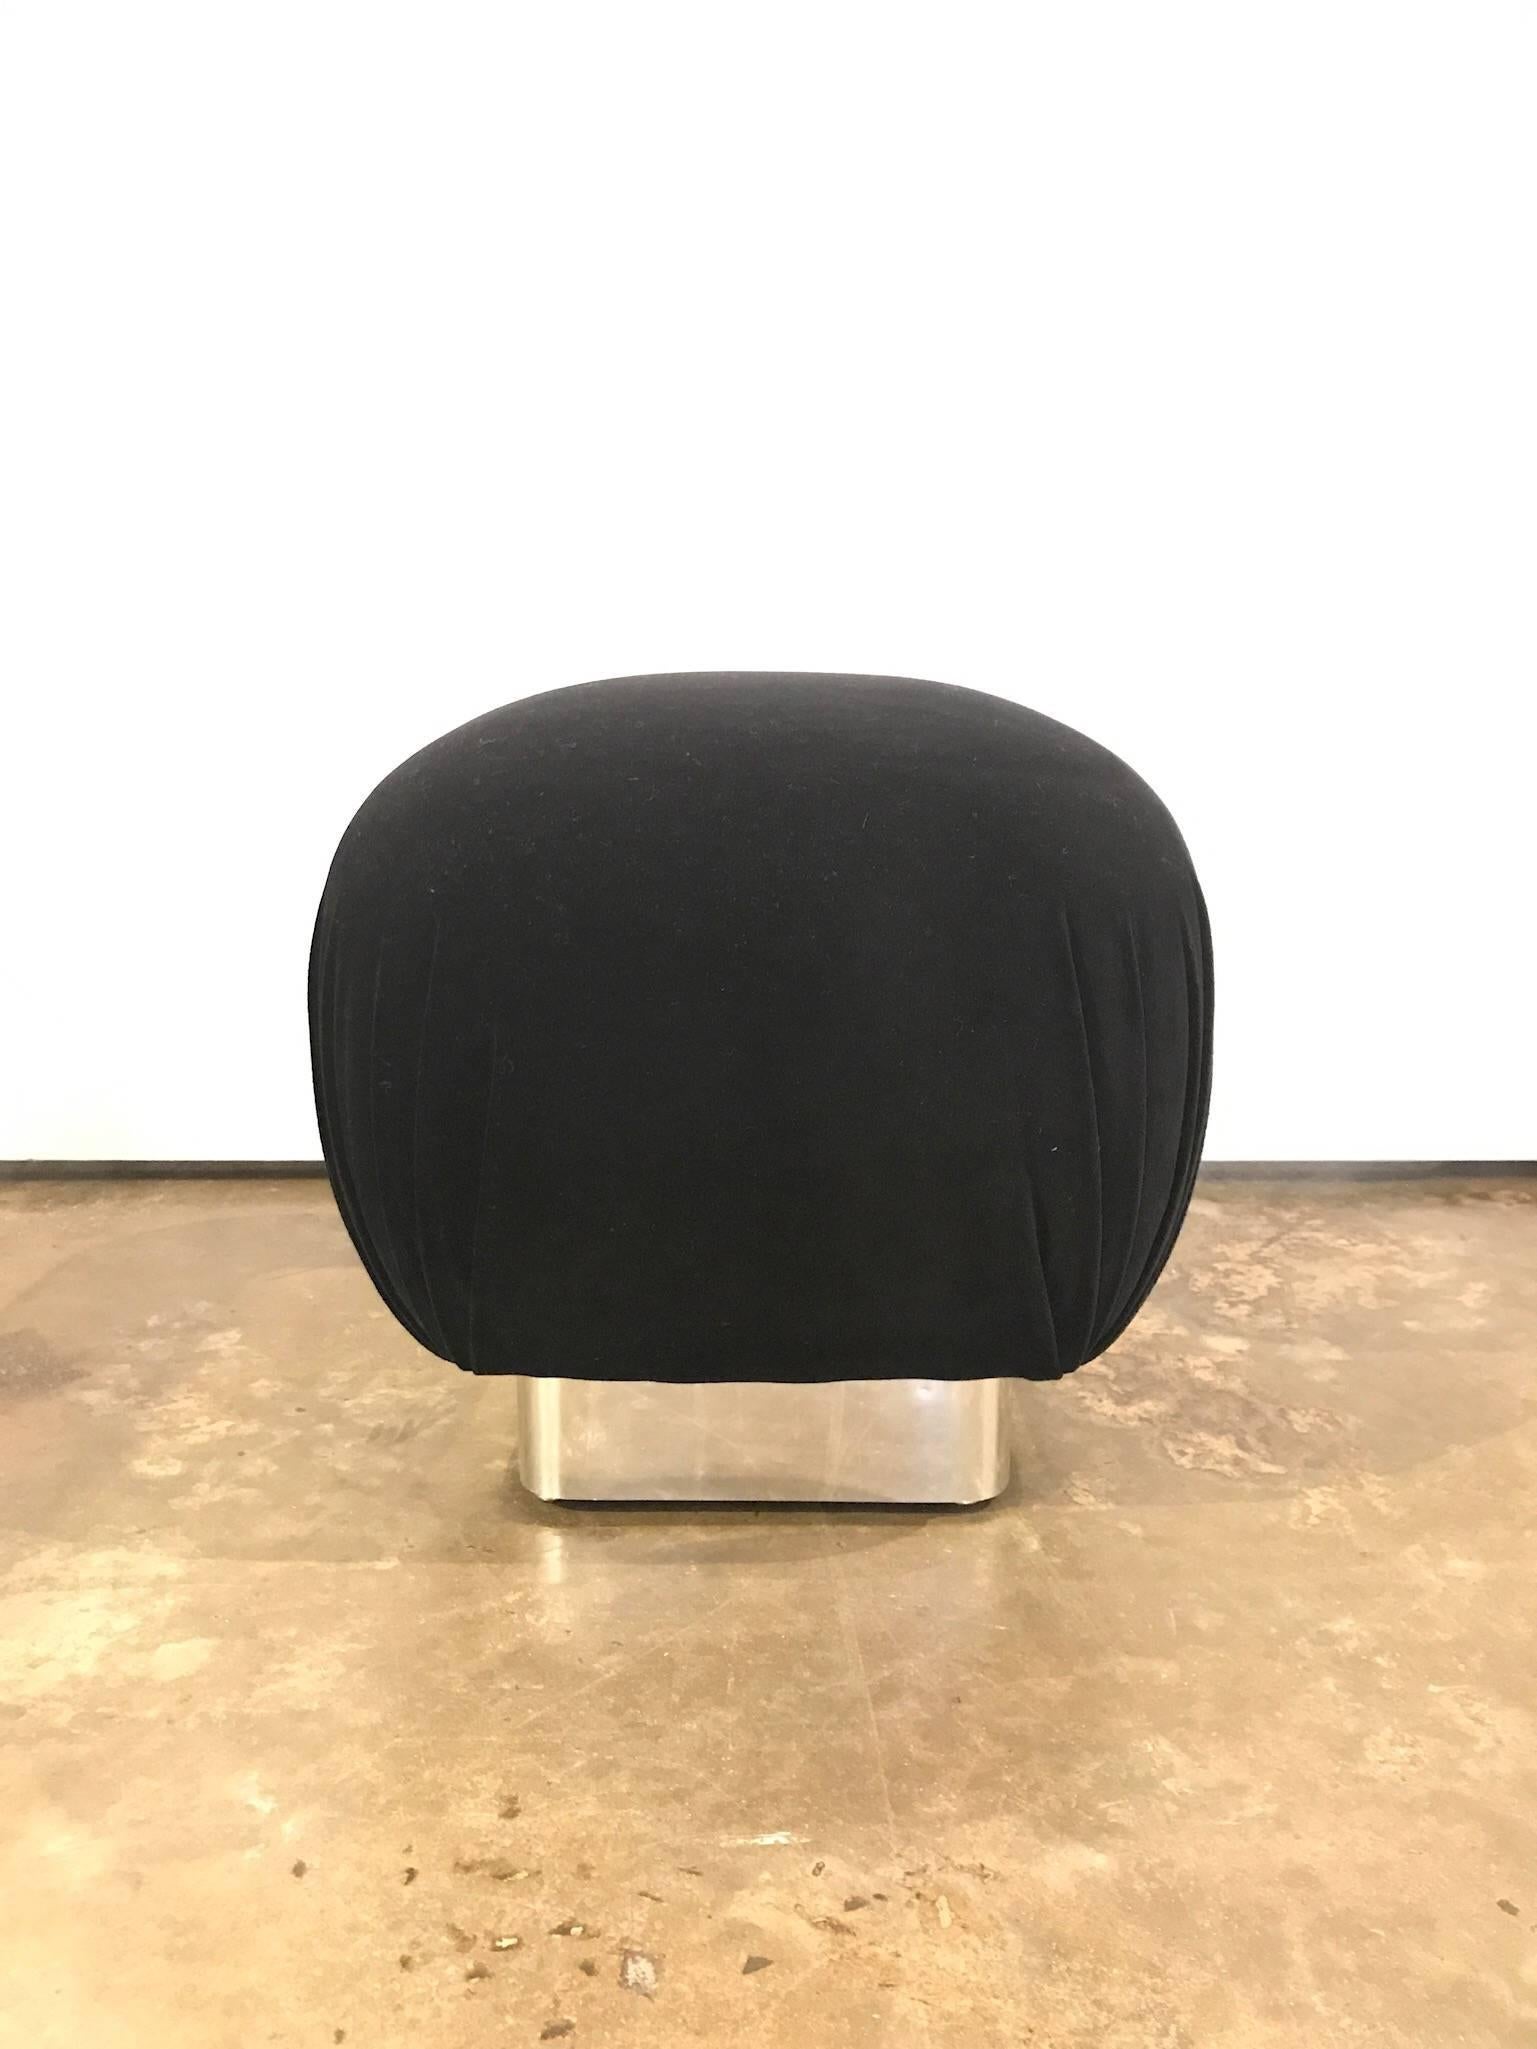 Offered is a Mid-Century Modern, newly upholstered in black velvet and square chrome base Karl Springer style round pouf. This very glamorous piece will look fabulous in almost any room with any style of furniture. Great for placing a tray for